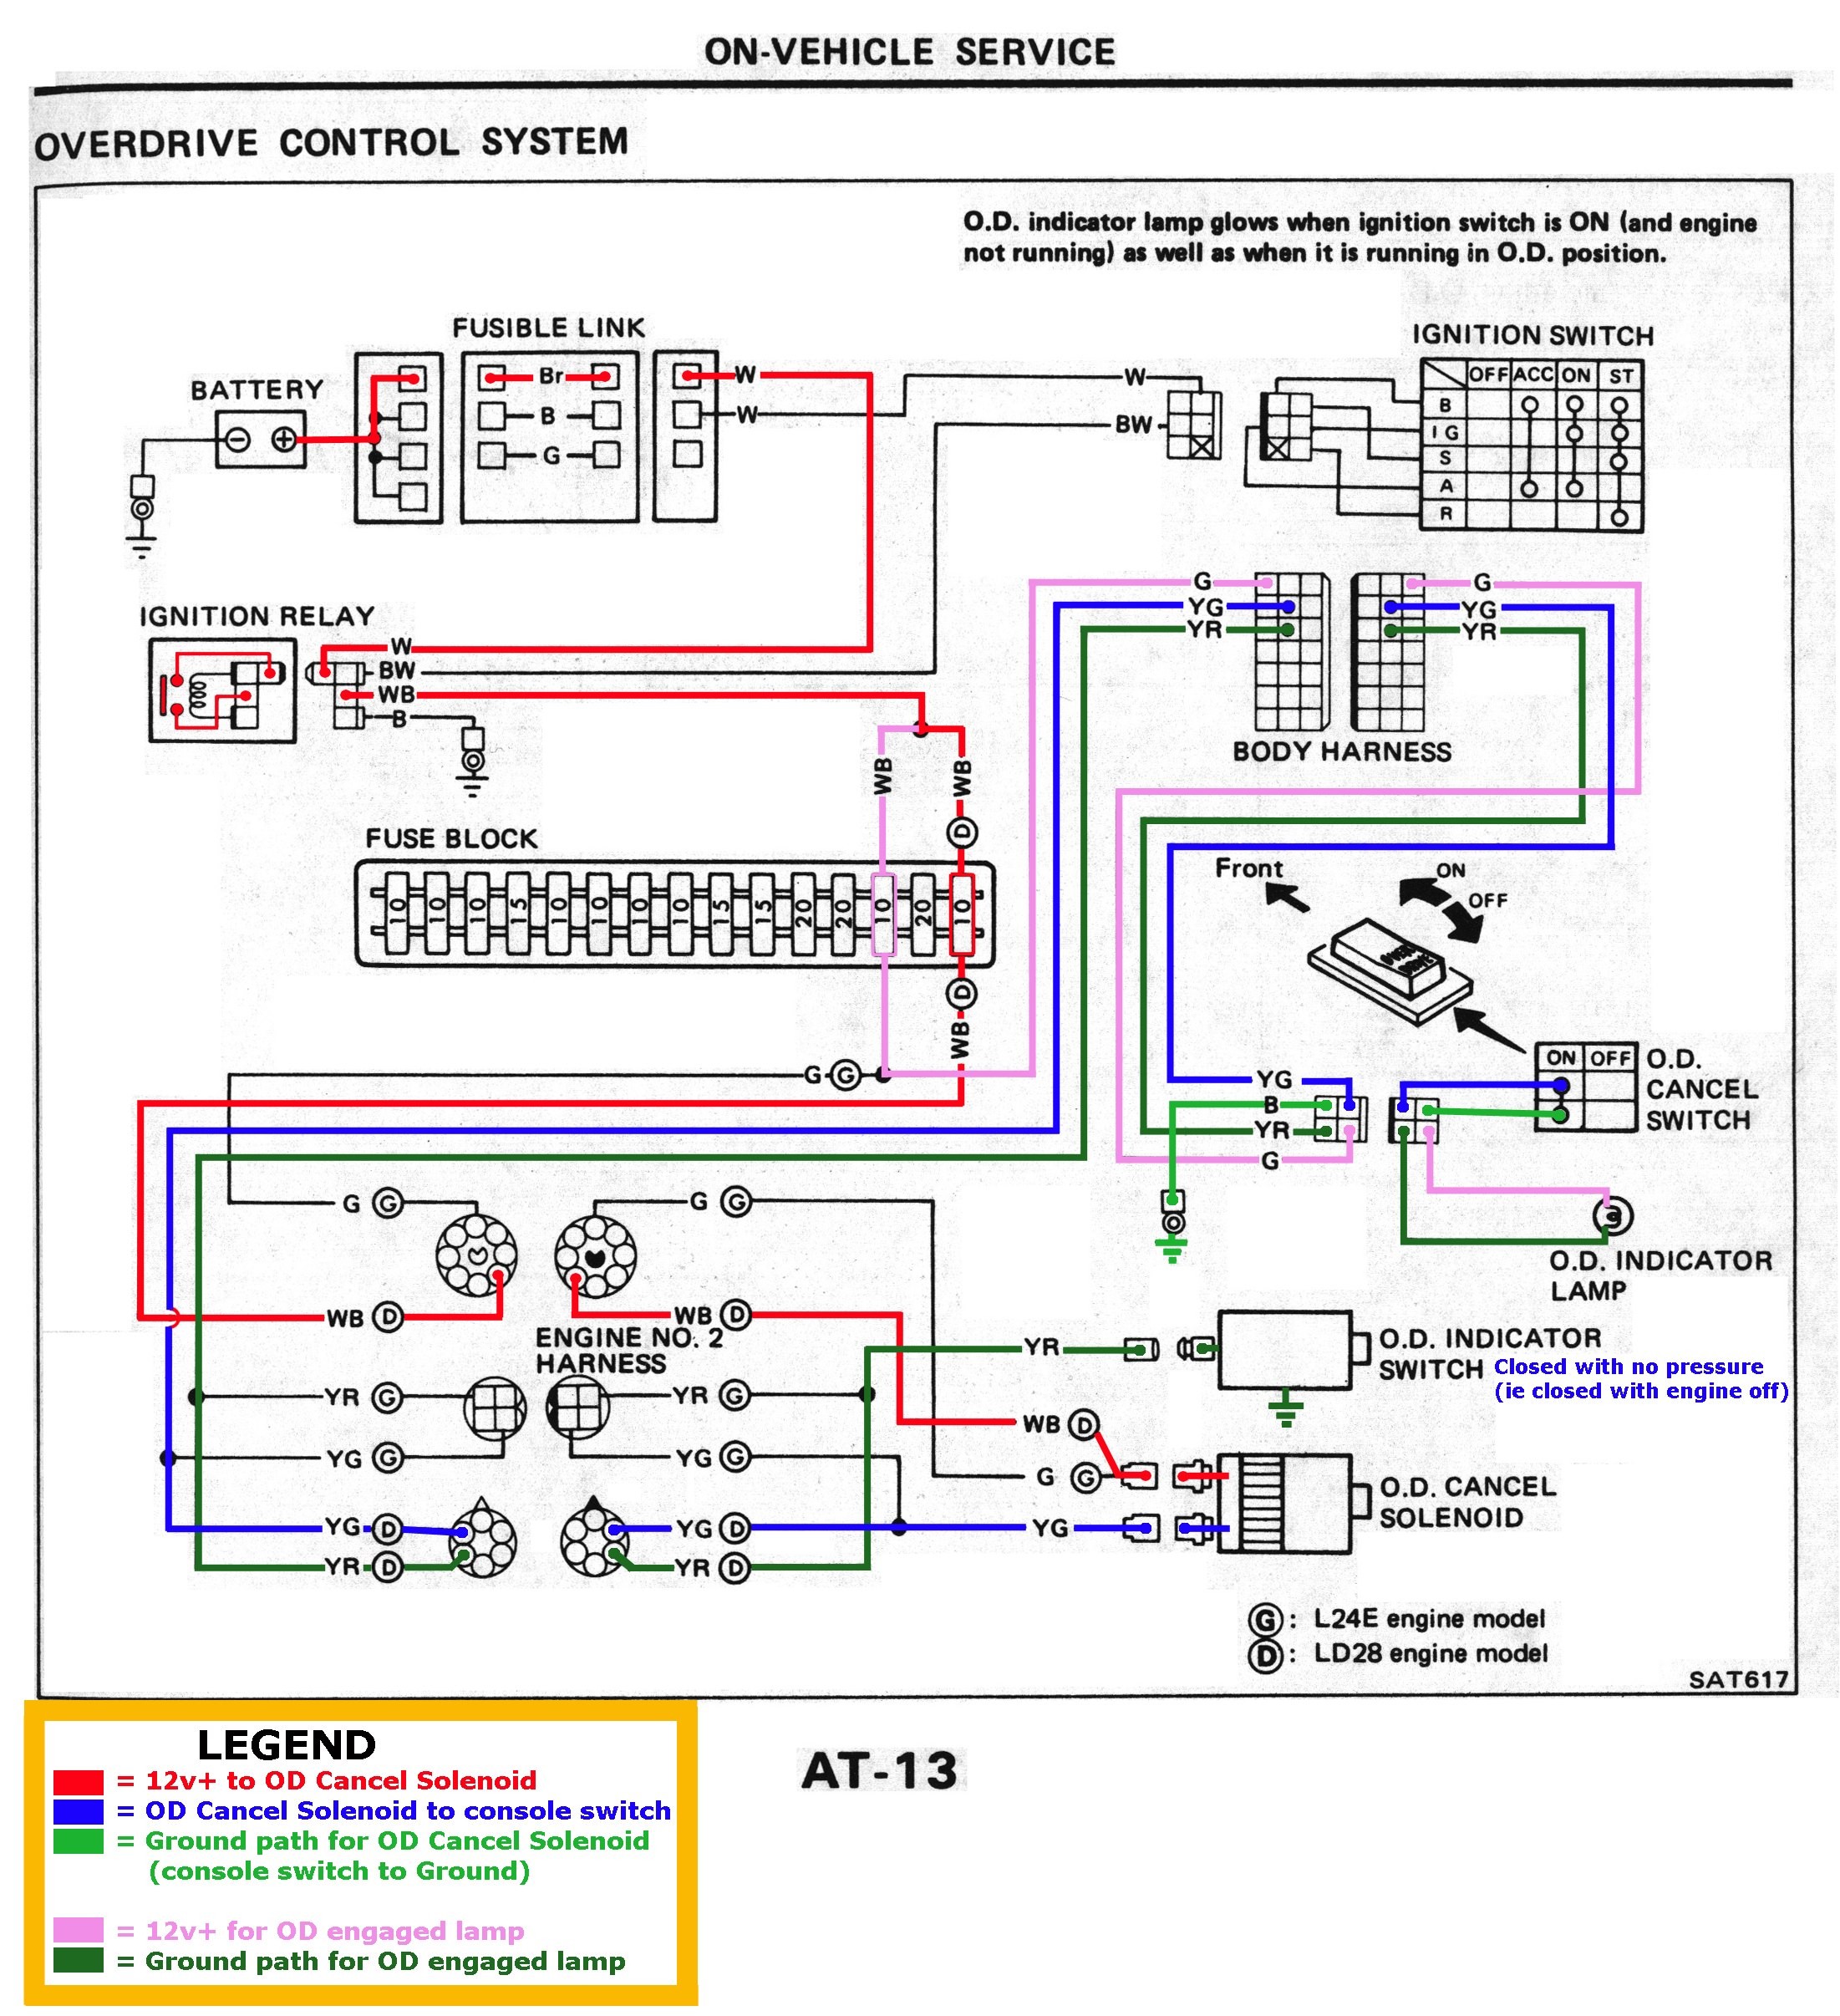 solenoid valve wiring schematic Collection Gas solenoid Valve Wiring Diagram Inspirational Nissan sel forums • DOWNLOAD Wiring Diagram